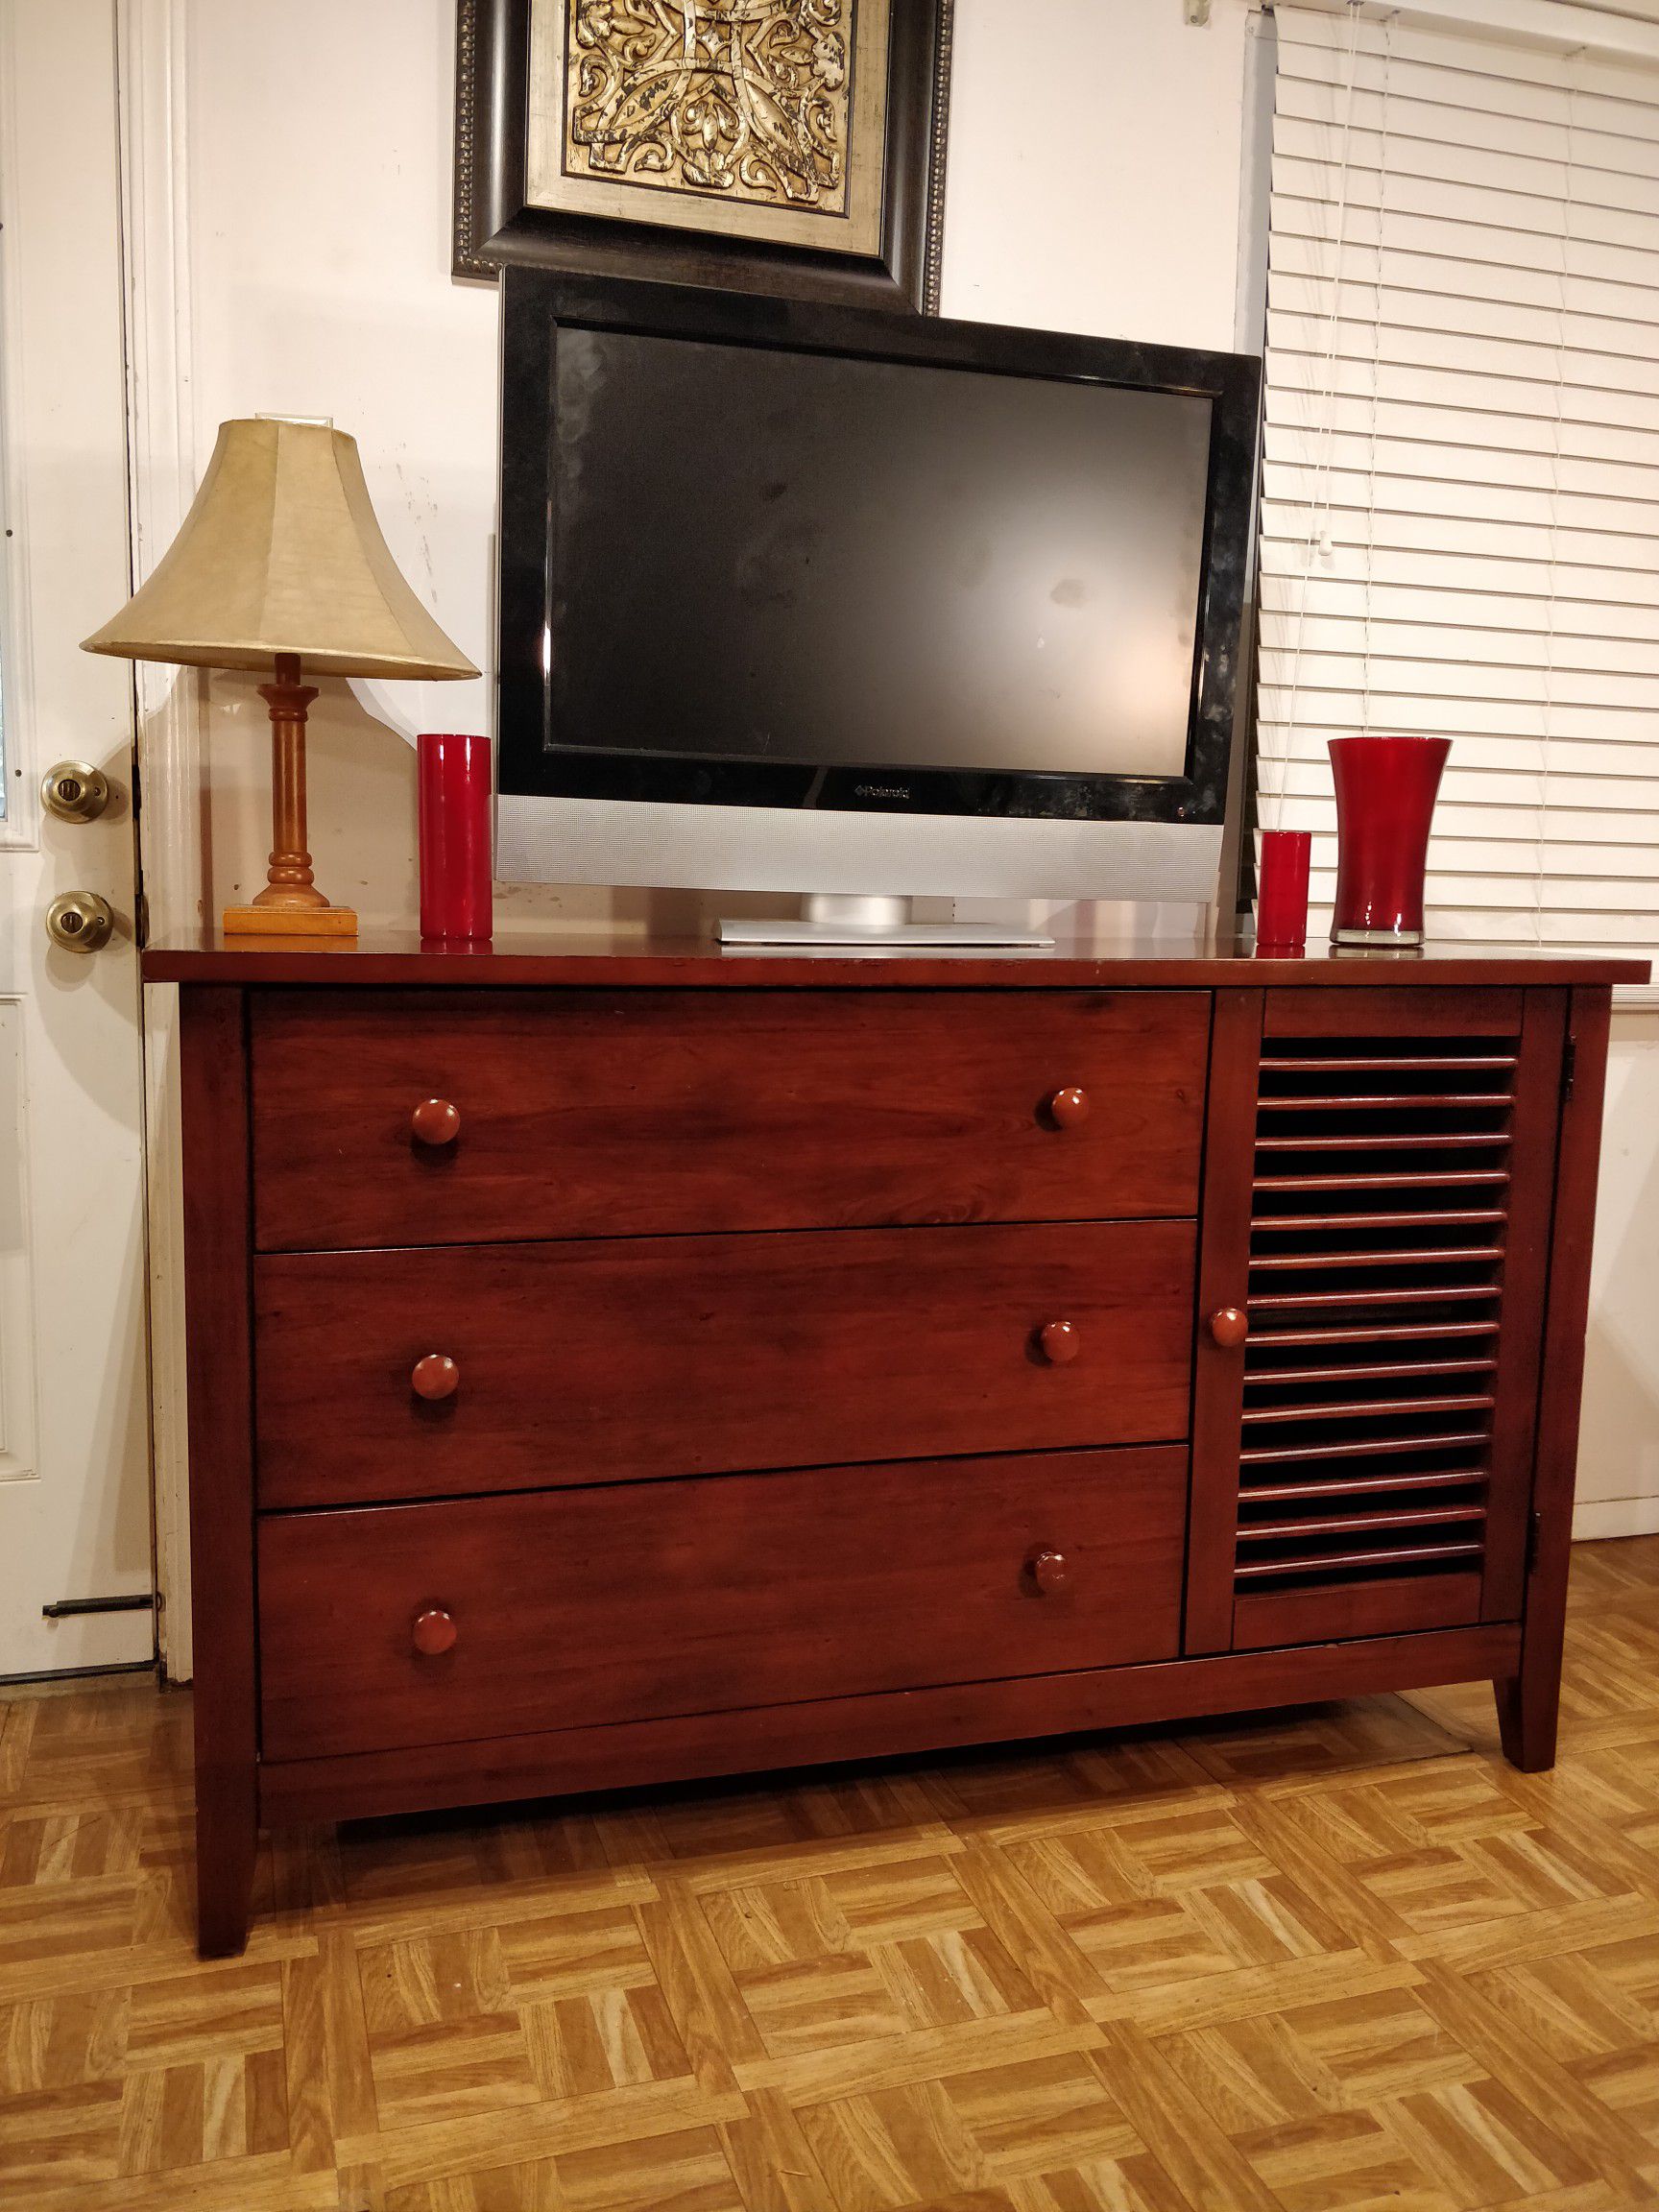 Nice solid wood dresser/buffet/TV stand with big drawers in very good condition, all drawers sliding smoothly. L56"*W29"*H34"